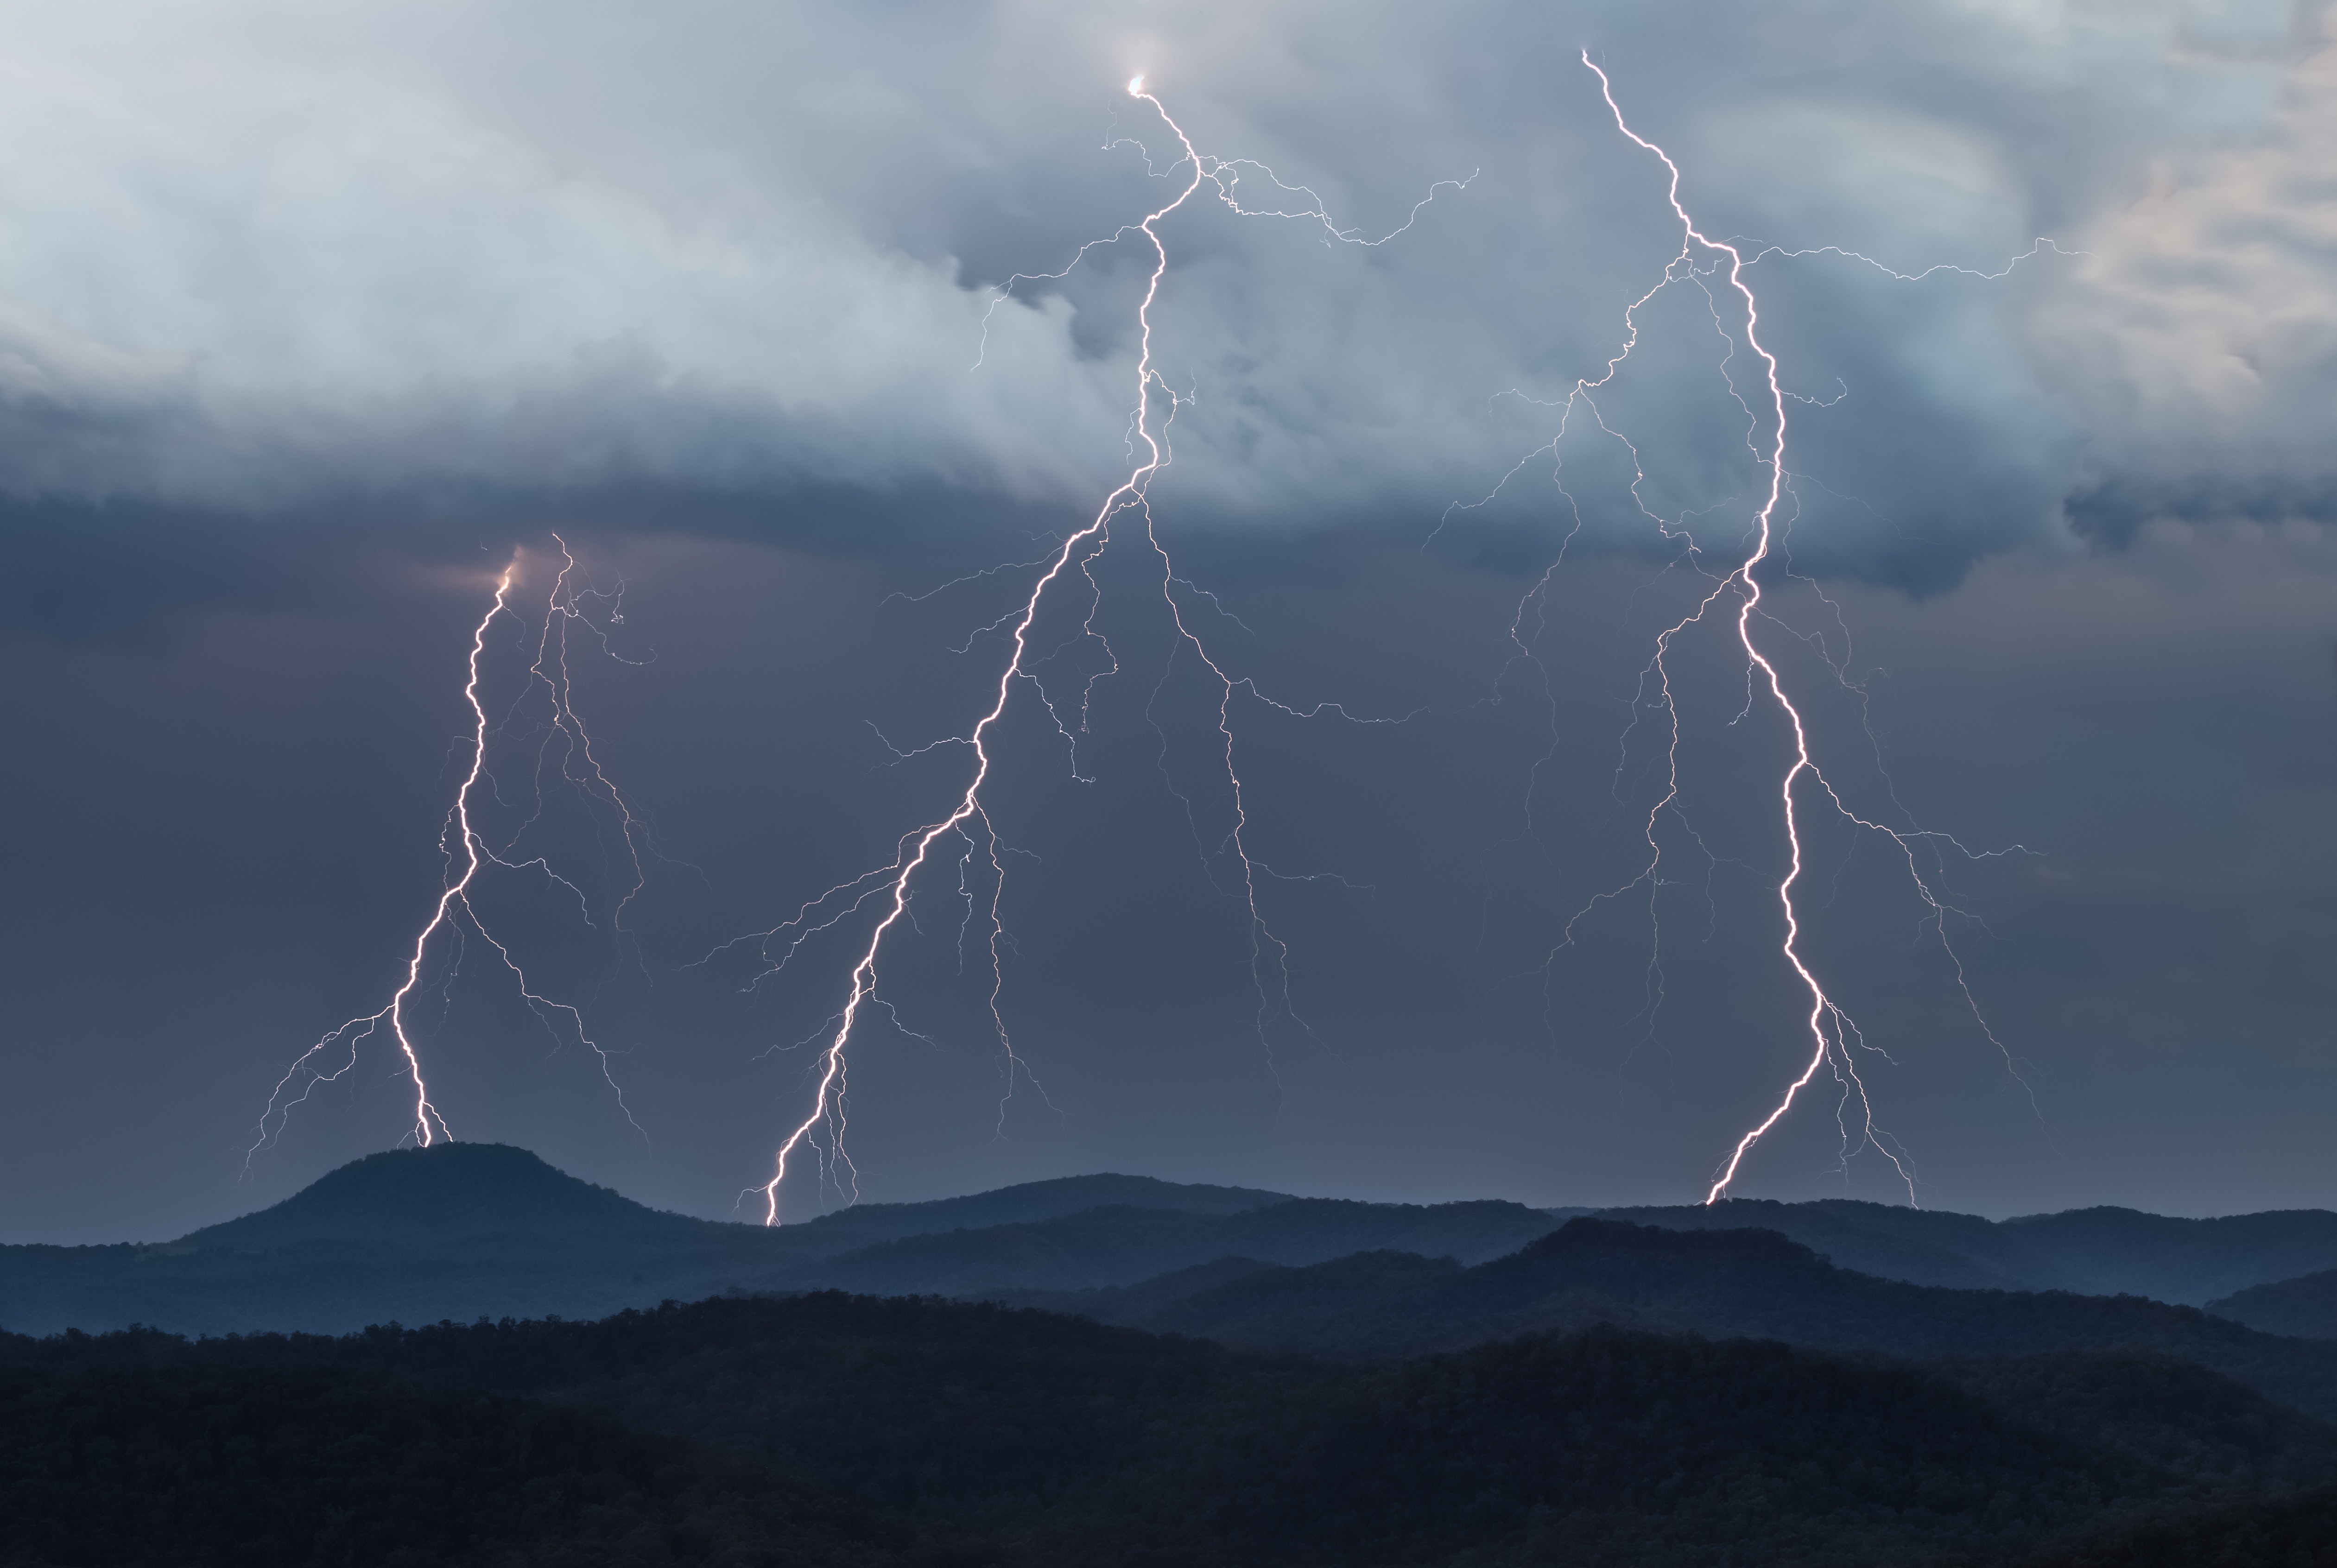 General 5043x3384 storm thunder storm thunderbolt nature landscape mountains clouds photography low light